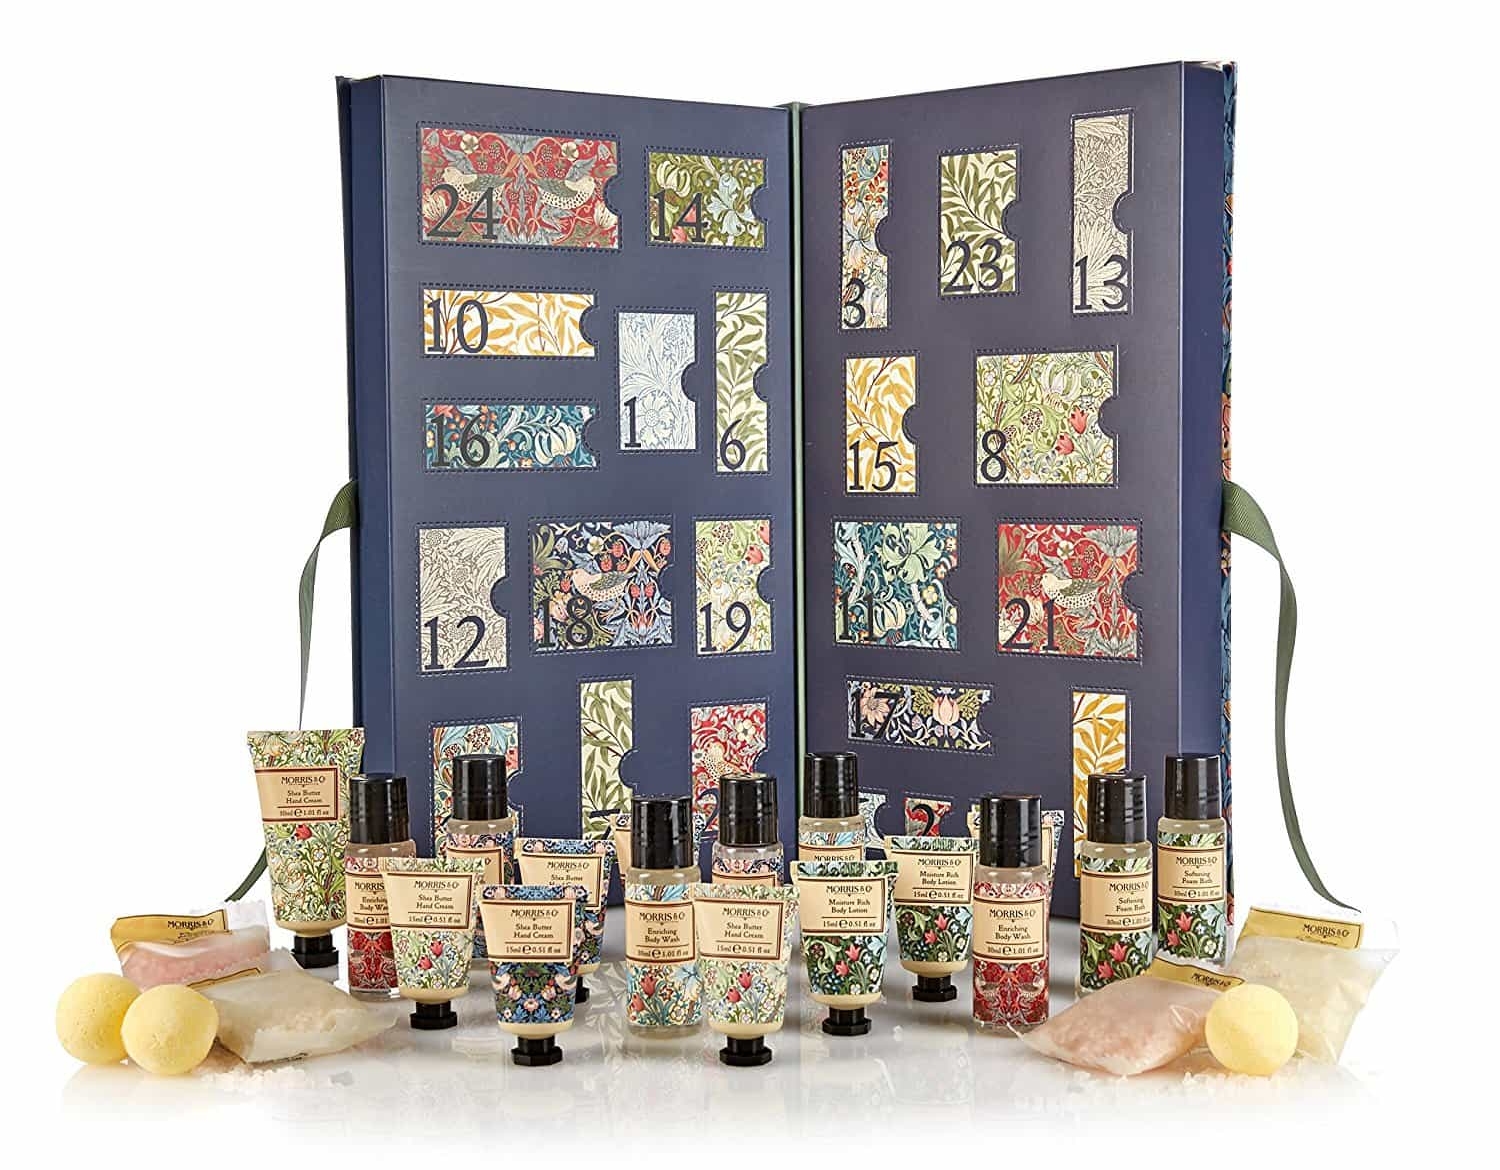 William Morris & Co. Beauty Advent Calendar 2017 Available Now in the